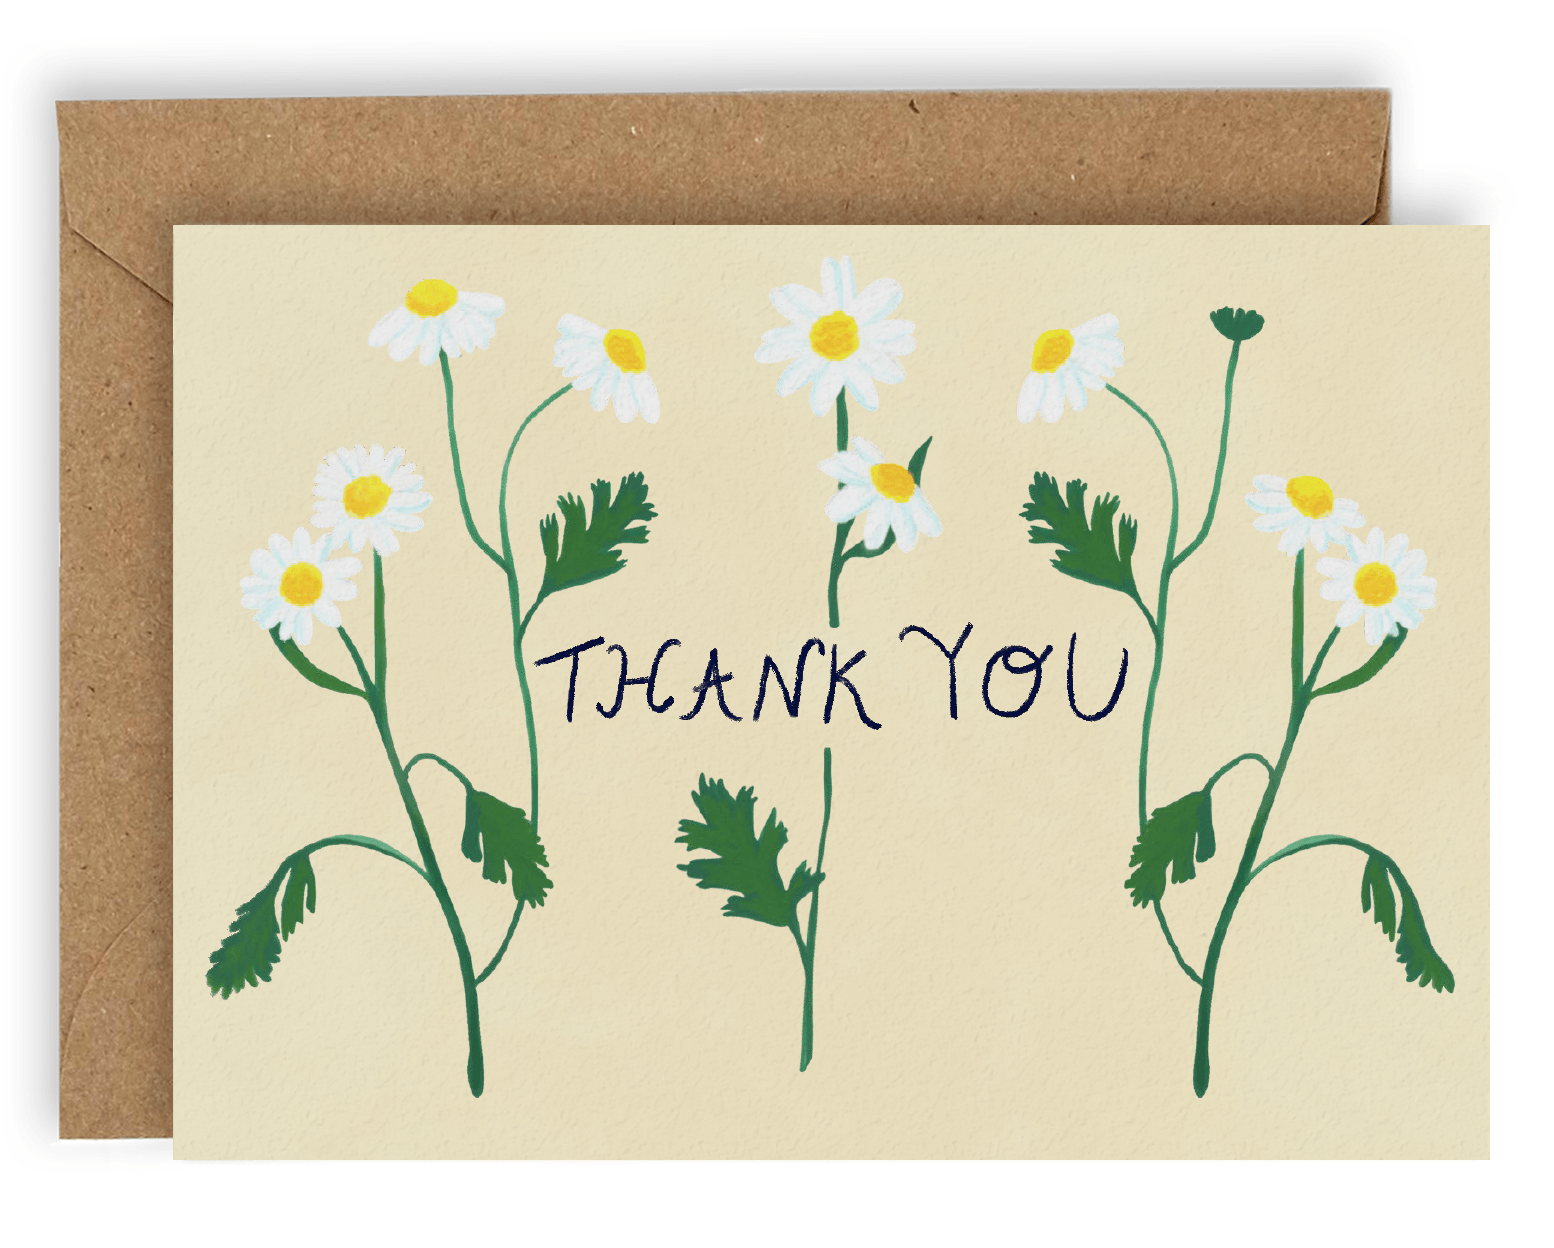 Three stems of lively white forest flowers cover the card nearly top to bottom horizontally, with the words &quot;Thank You&quot; going through the center of them in black ink. This design is printed on a cream colored background. Shown with Kraft envelope.